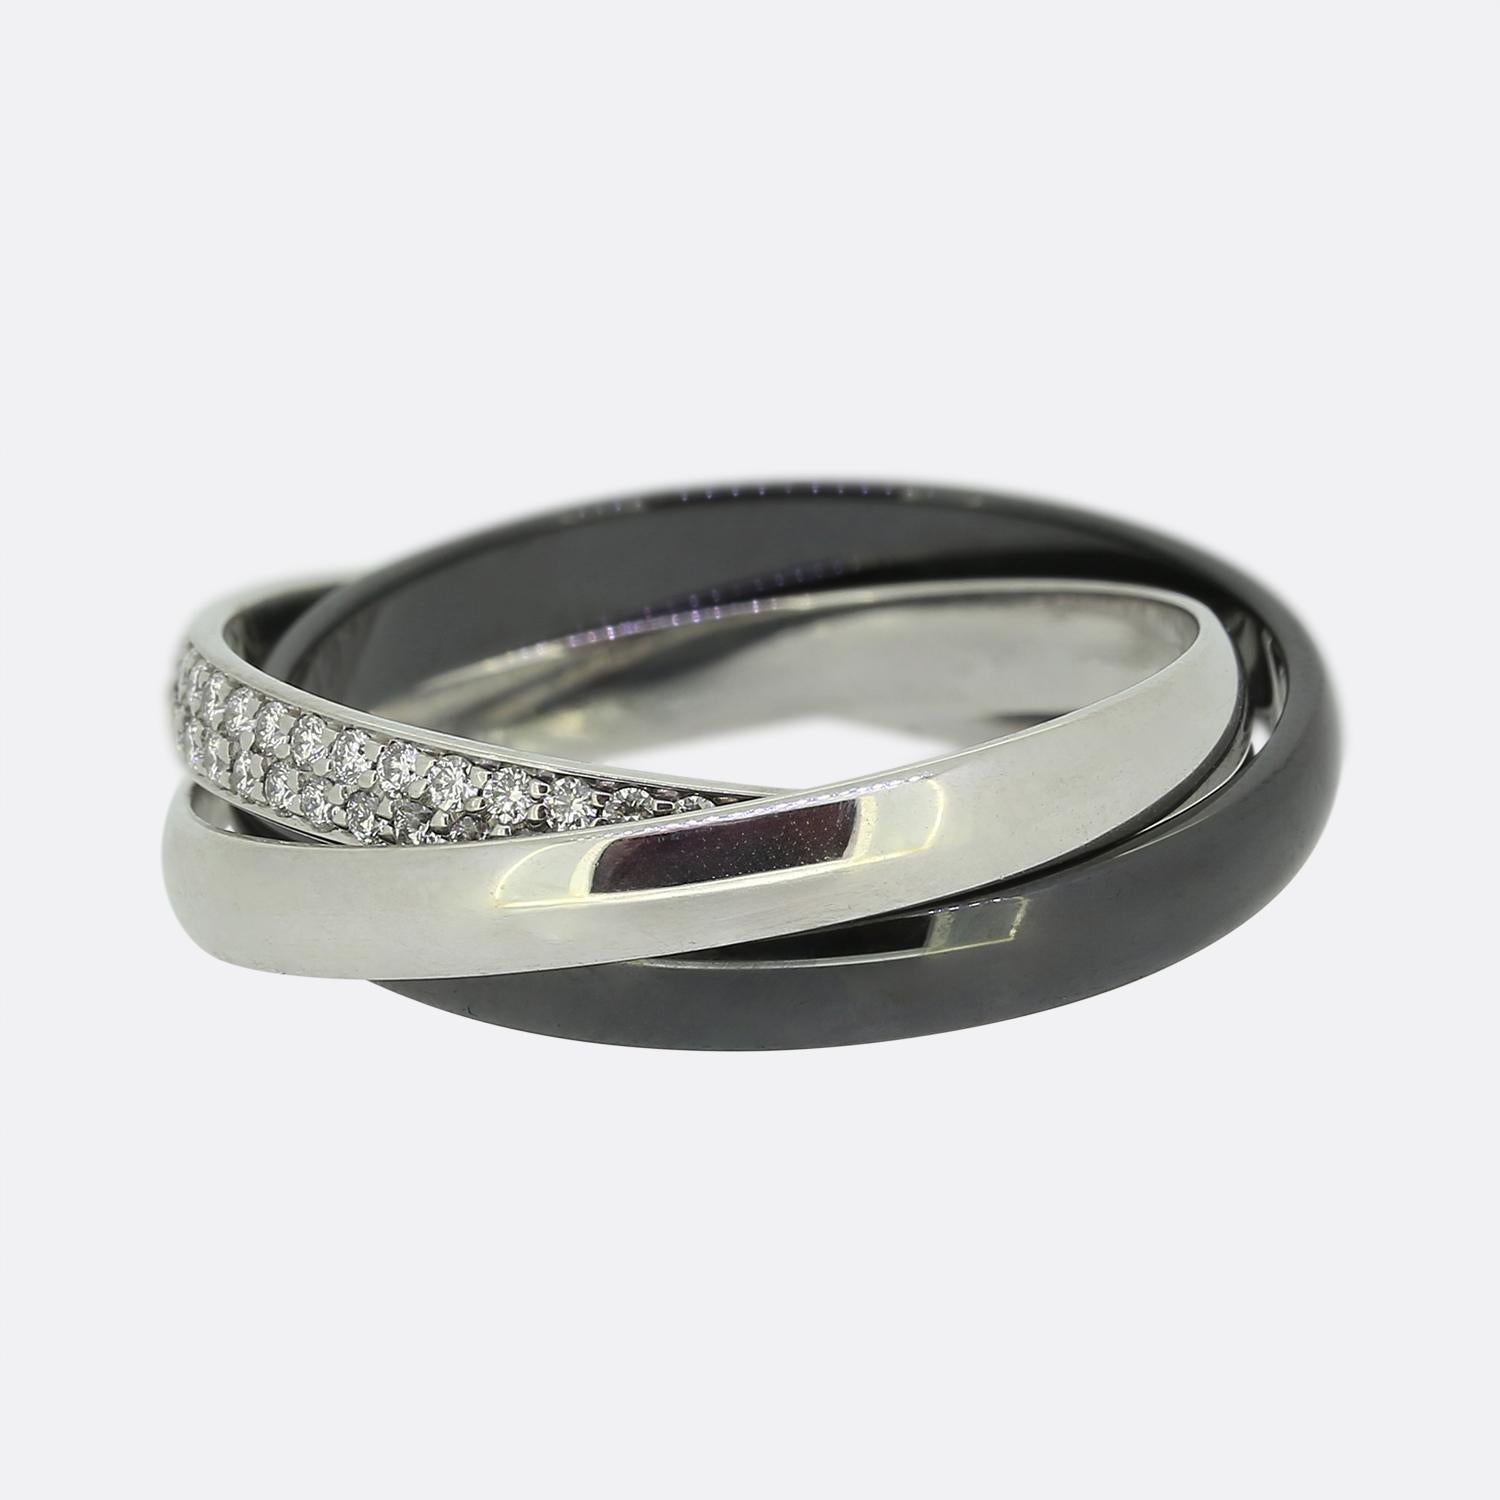 Here we have an platinum and 18ct white gold diamond trinity ring from the world renowned luxury jewellery house of Cartier. This ring features three interwinding bands. One 18ct white gold, one platinum and one in darkened ceramic; the white gold